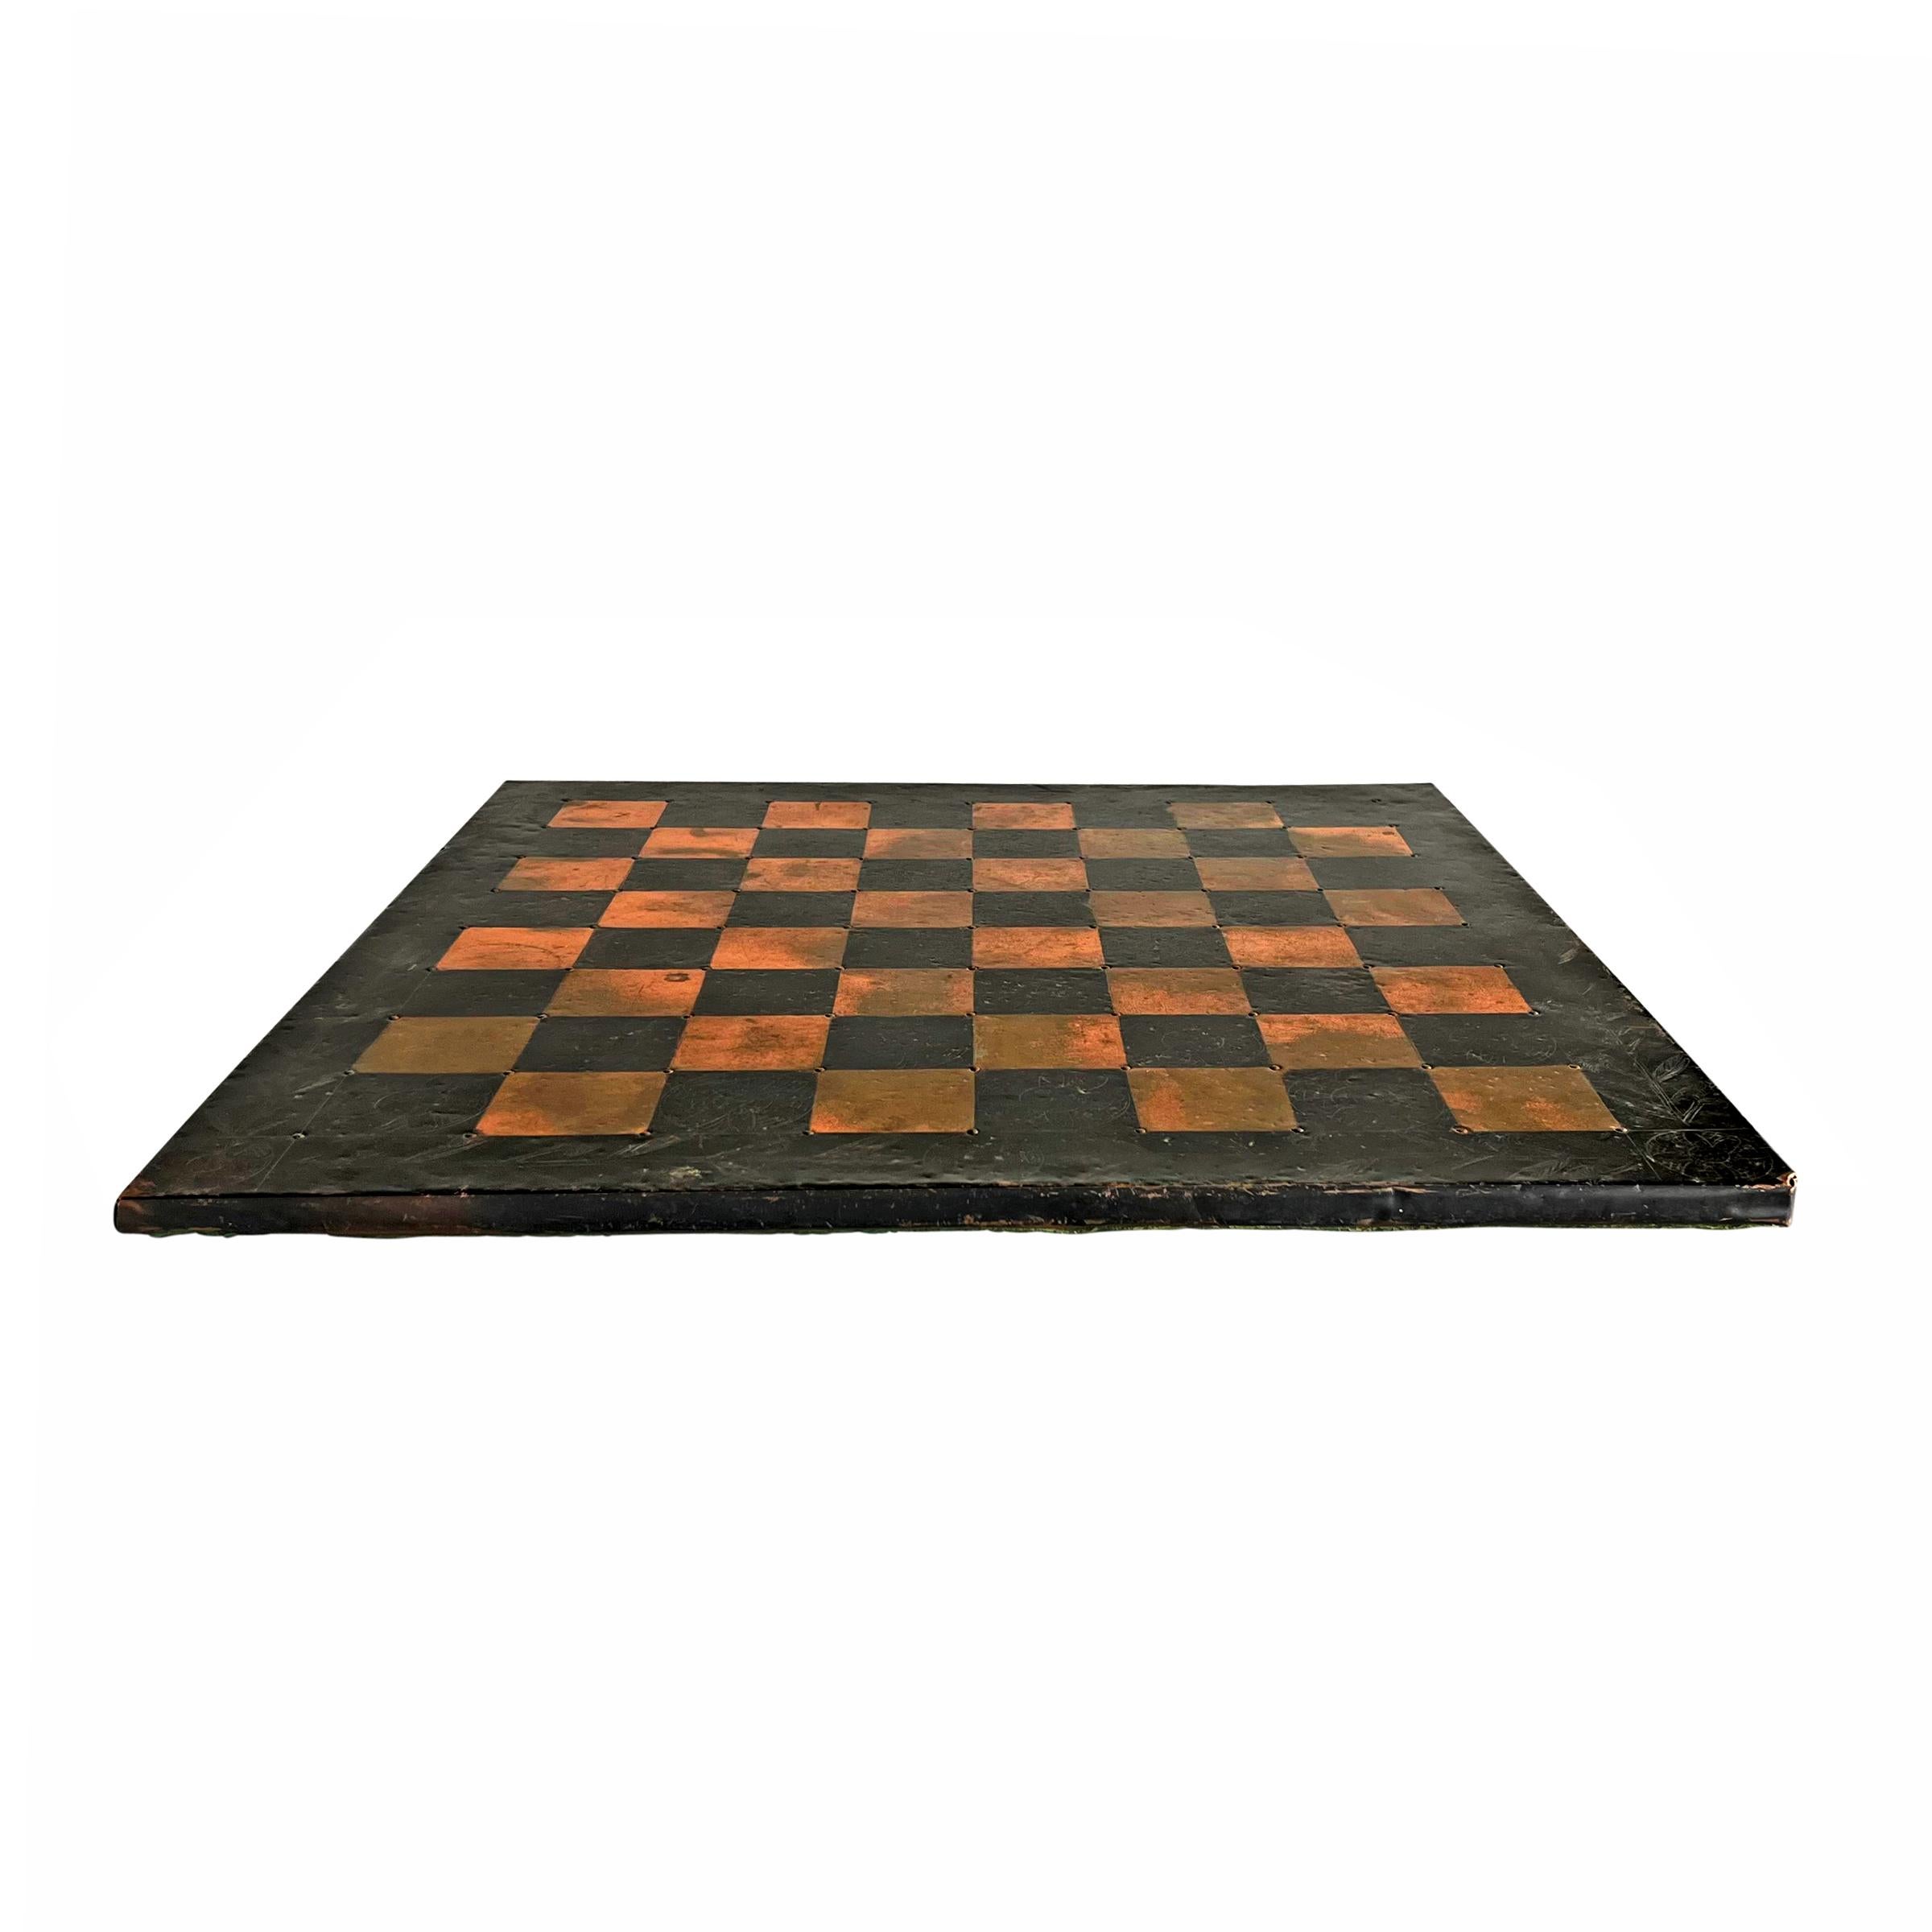 Vintage American Folk Art Copper Chess Board In Good Condition For Sale In Chicago, IL